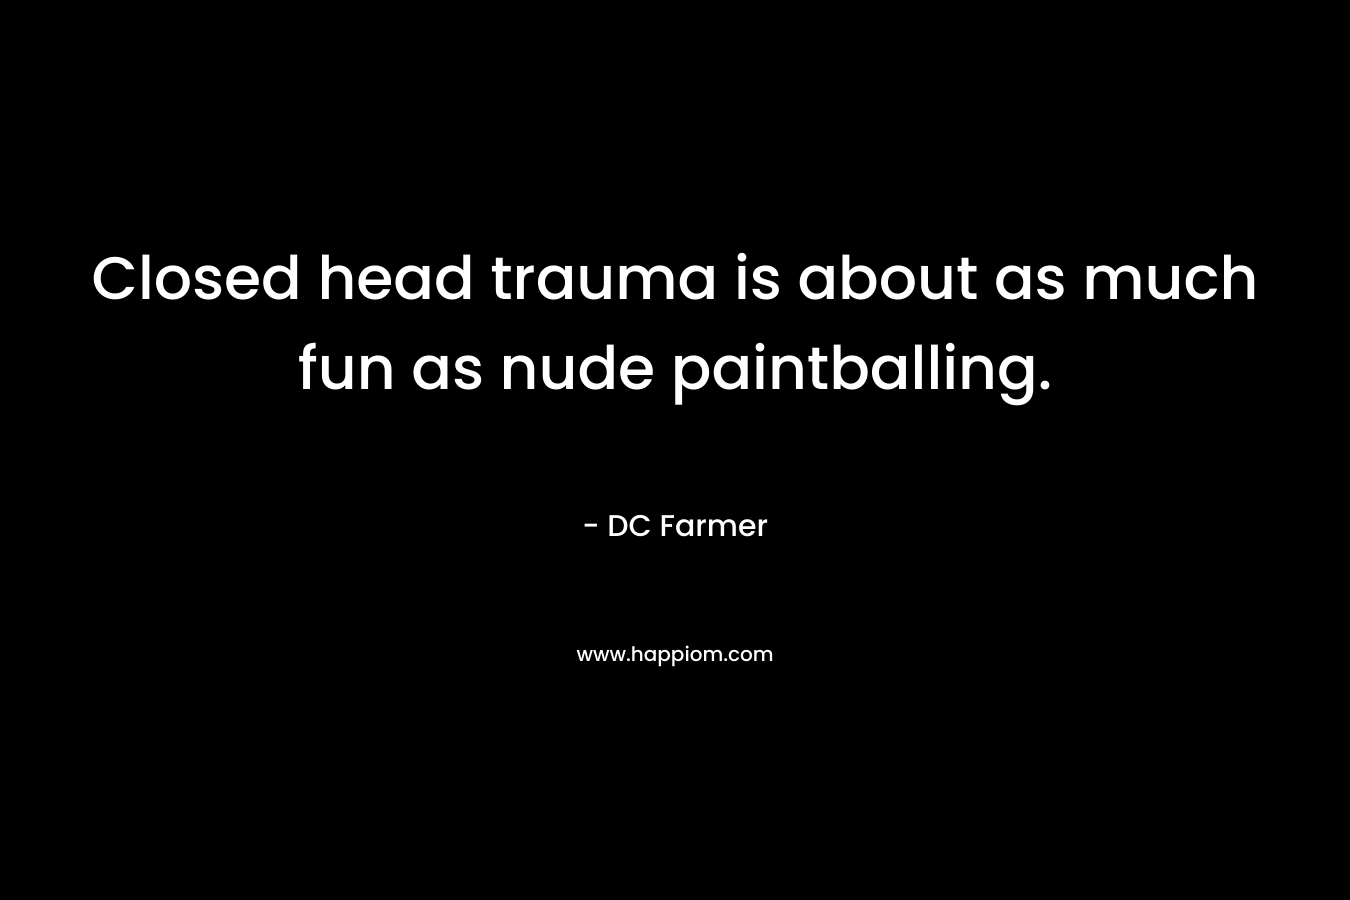 Closed head trauma is about as much fun as nude paintballing.